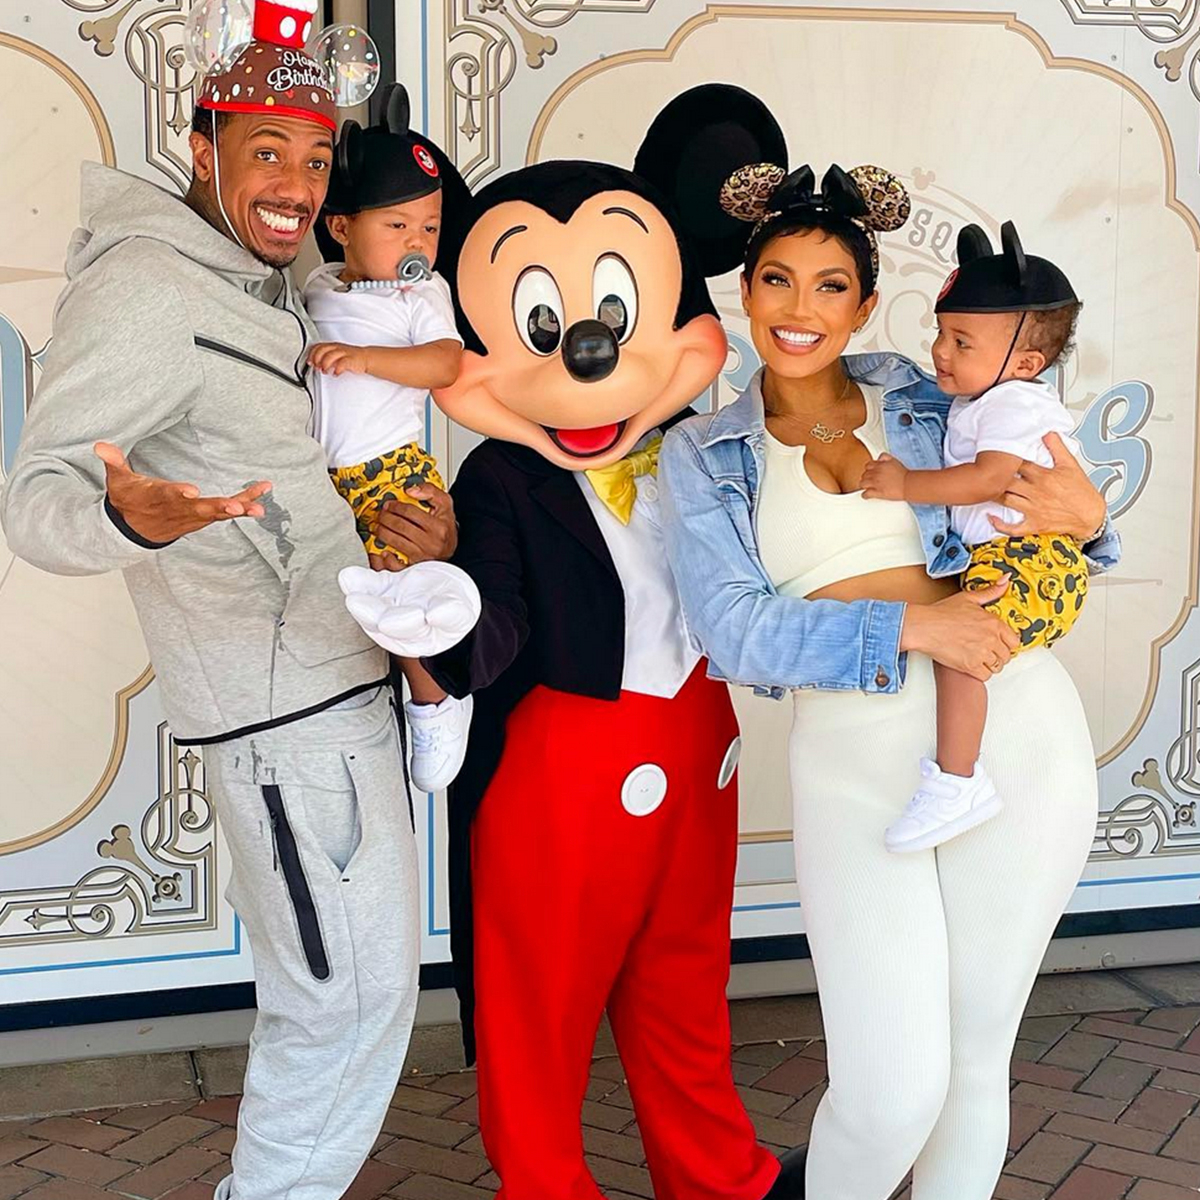 See Abby De La Rosa’s Post With “Newly Engaged Baby Daddy” Nick Cannon